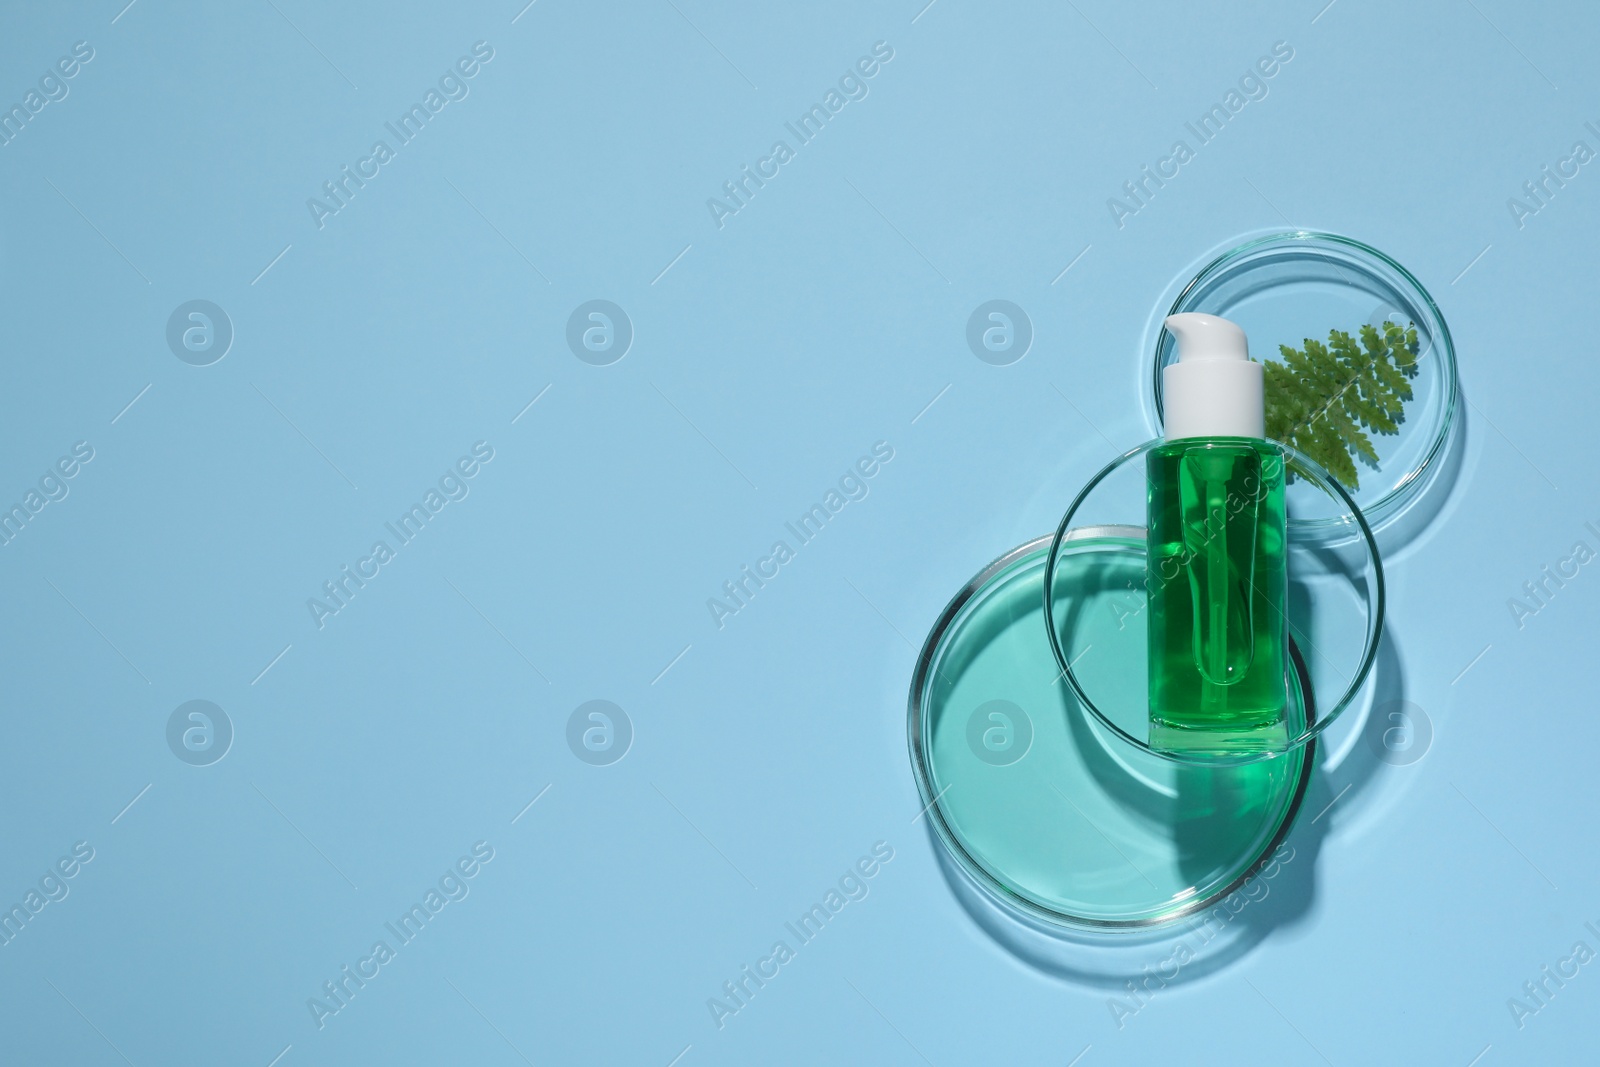 Photo of Organic cosmetic product, natural ingredient and laboratory glassware on light blue background, flat lay. Space for text